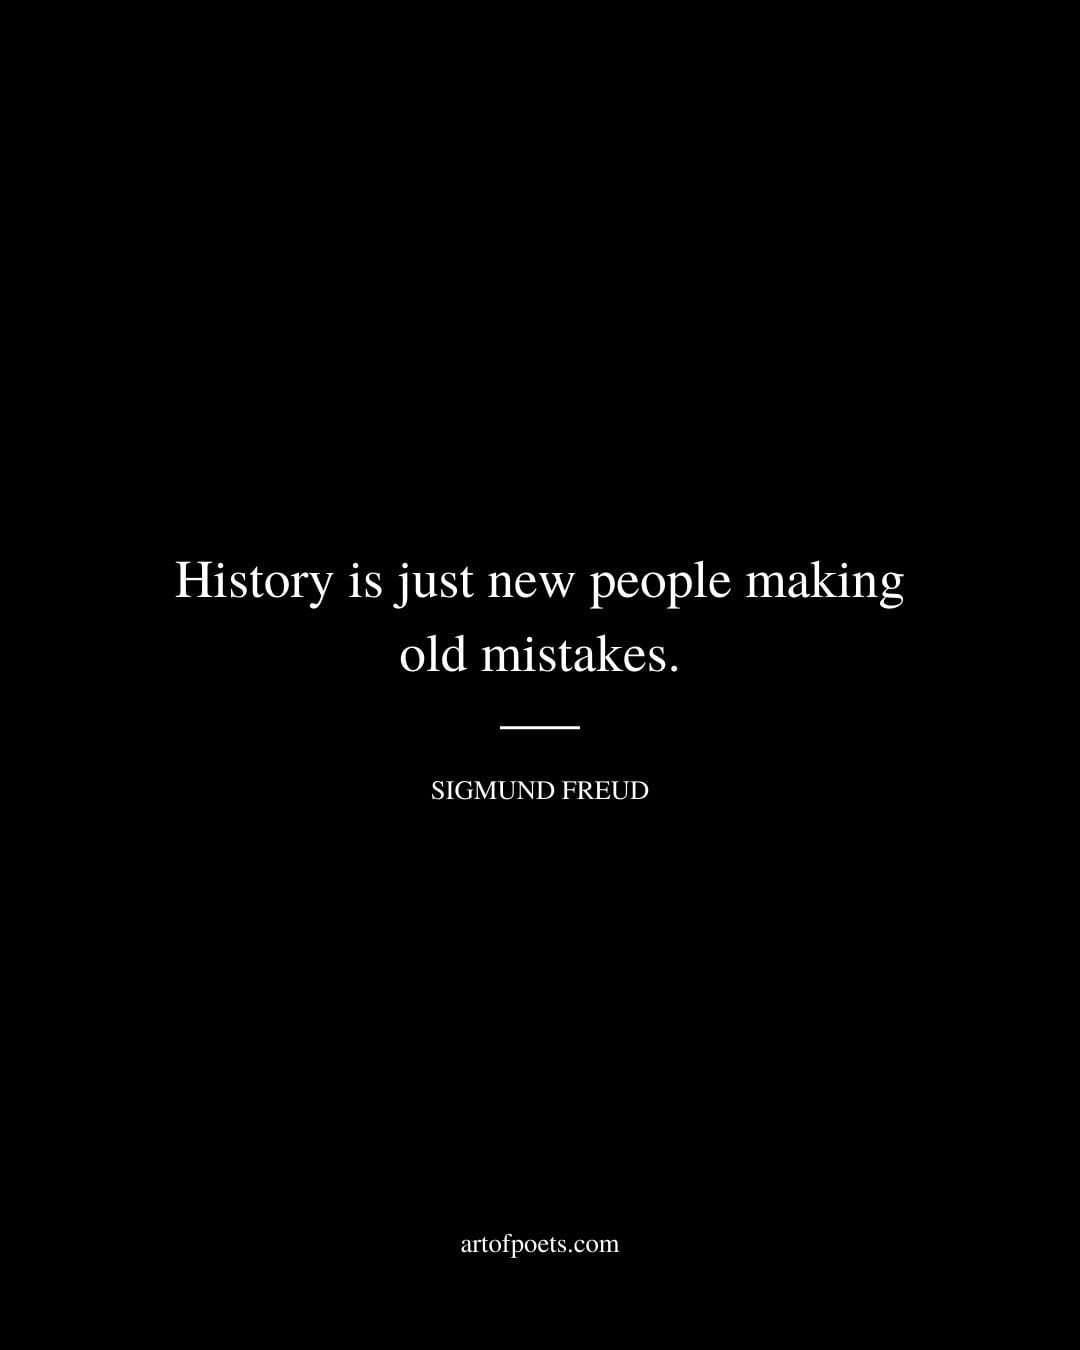 History is just new people making old mistakes